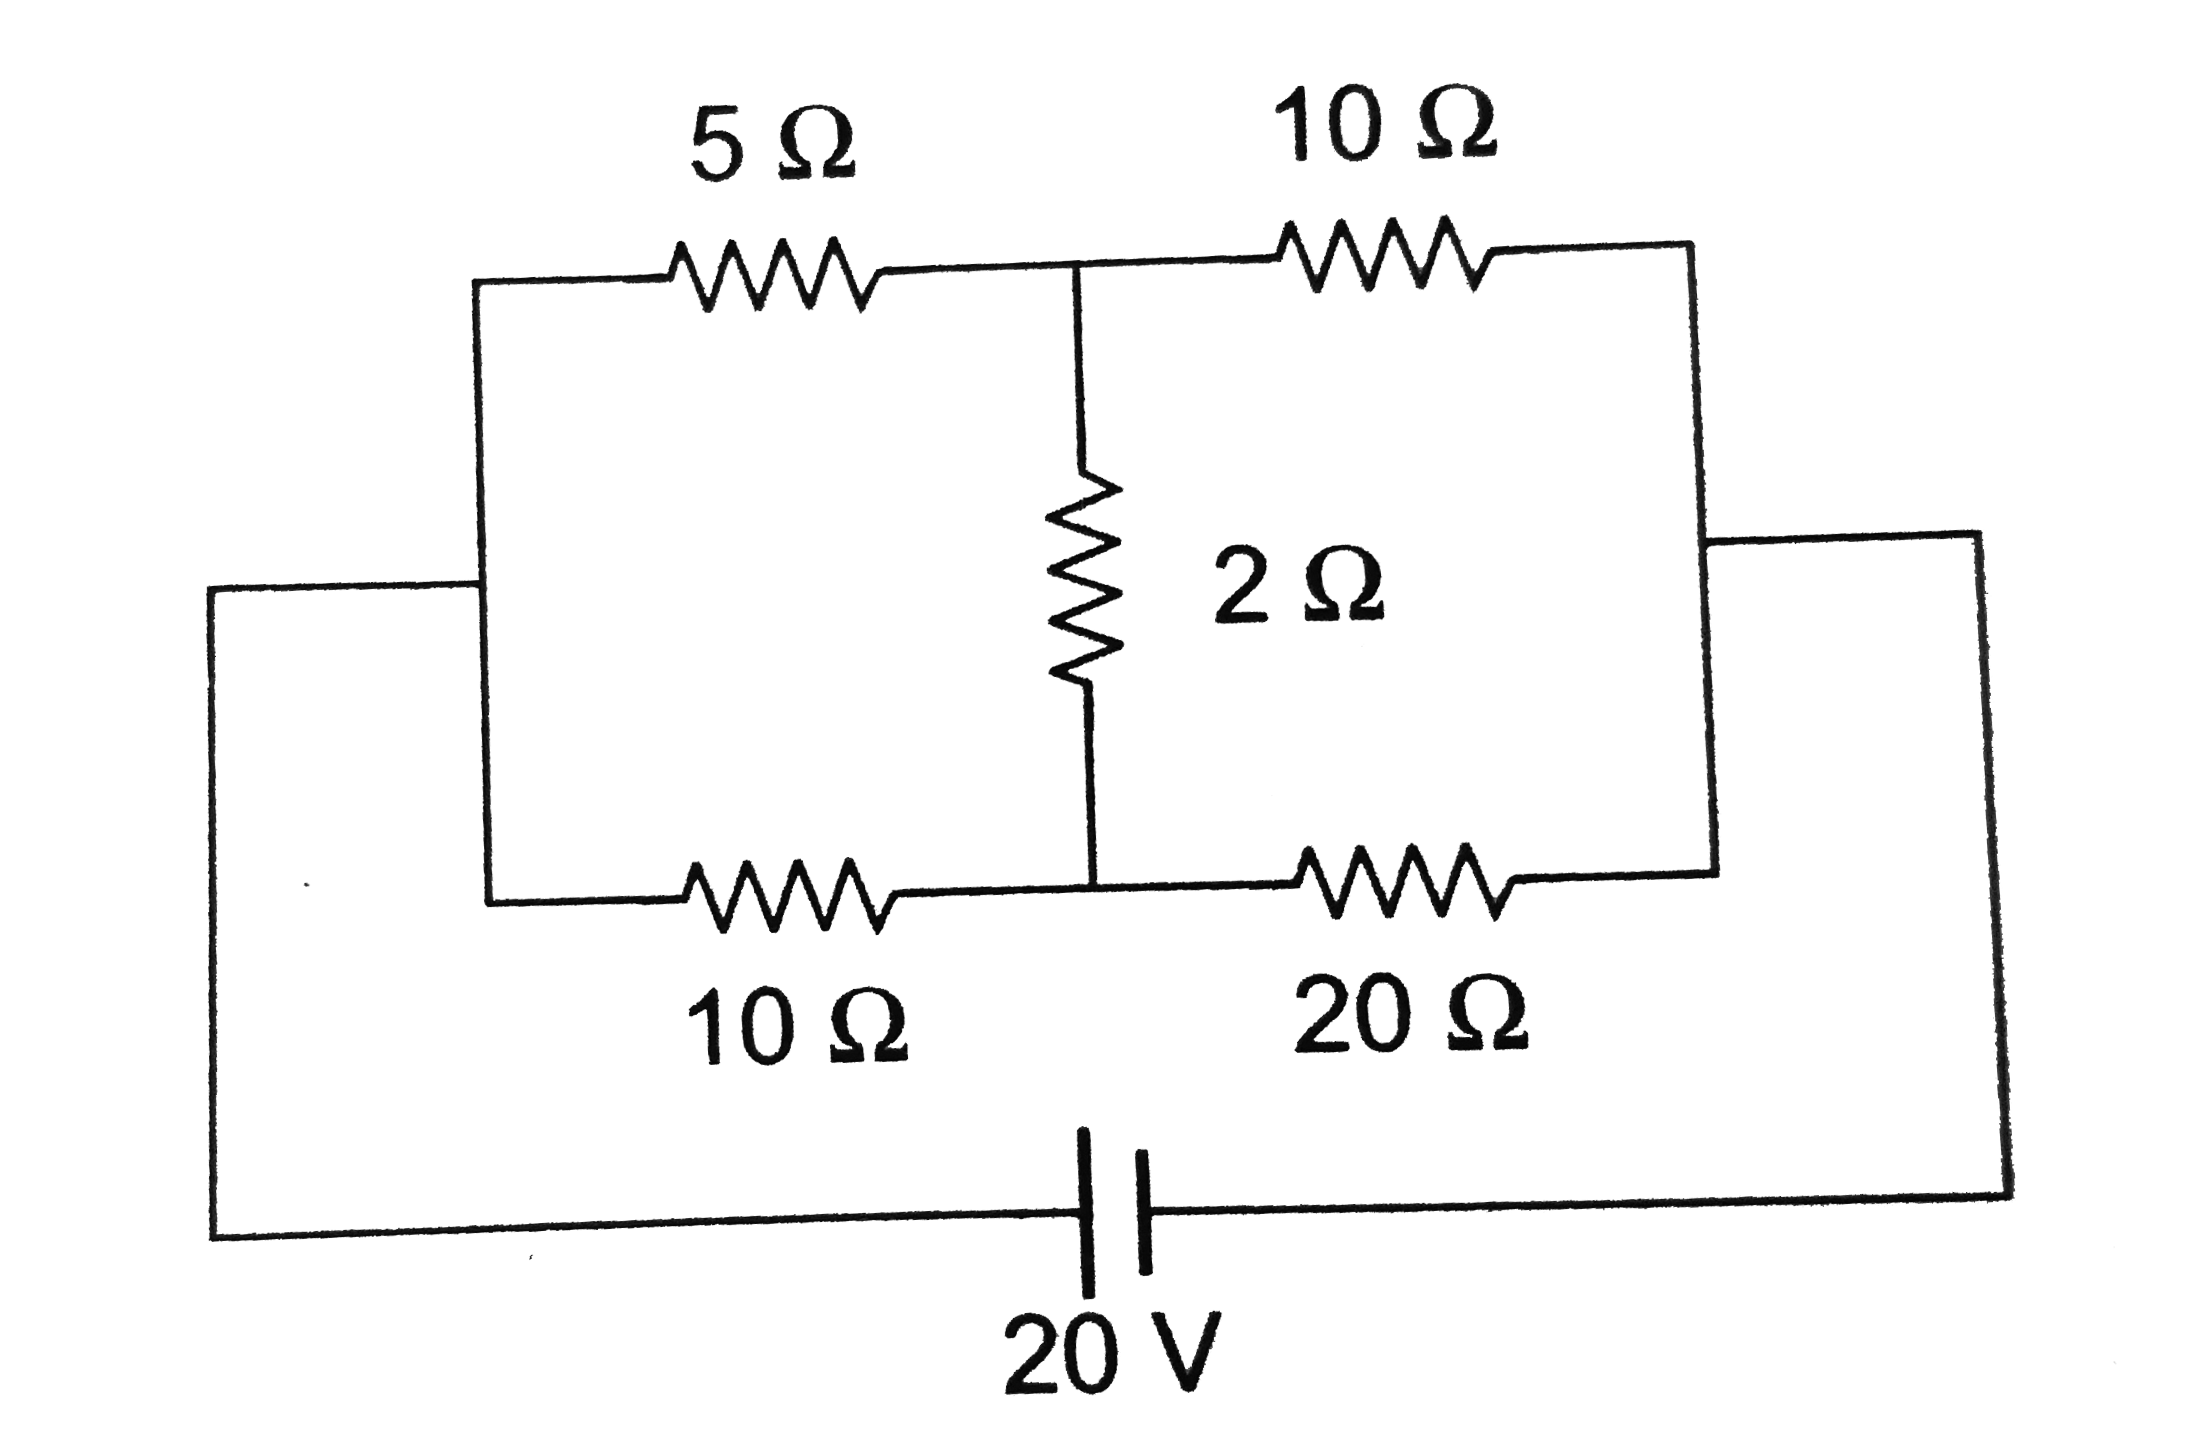 potential difference circuit